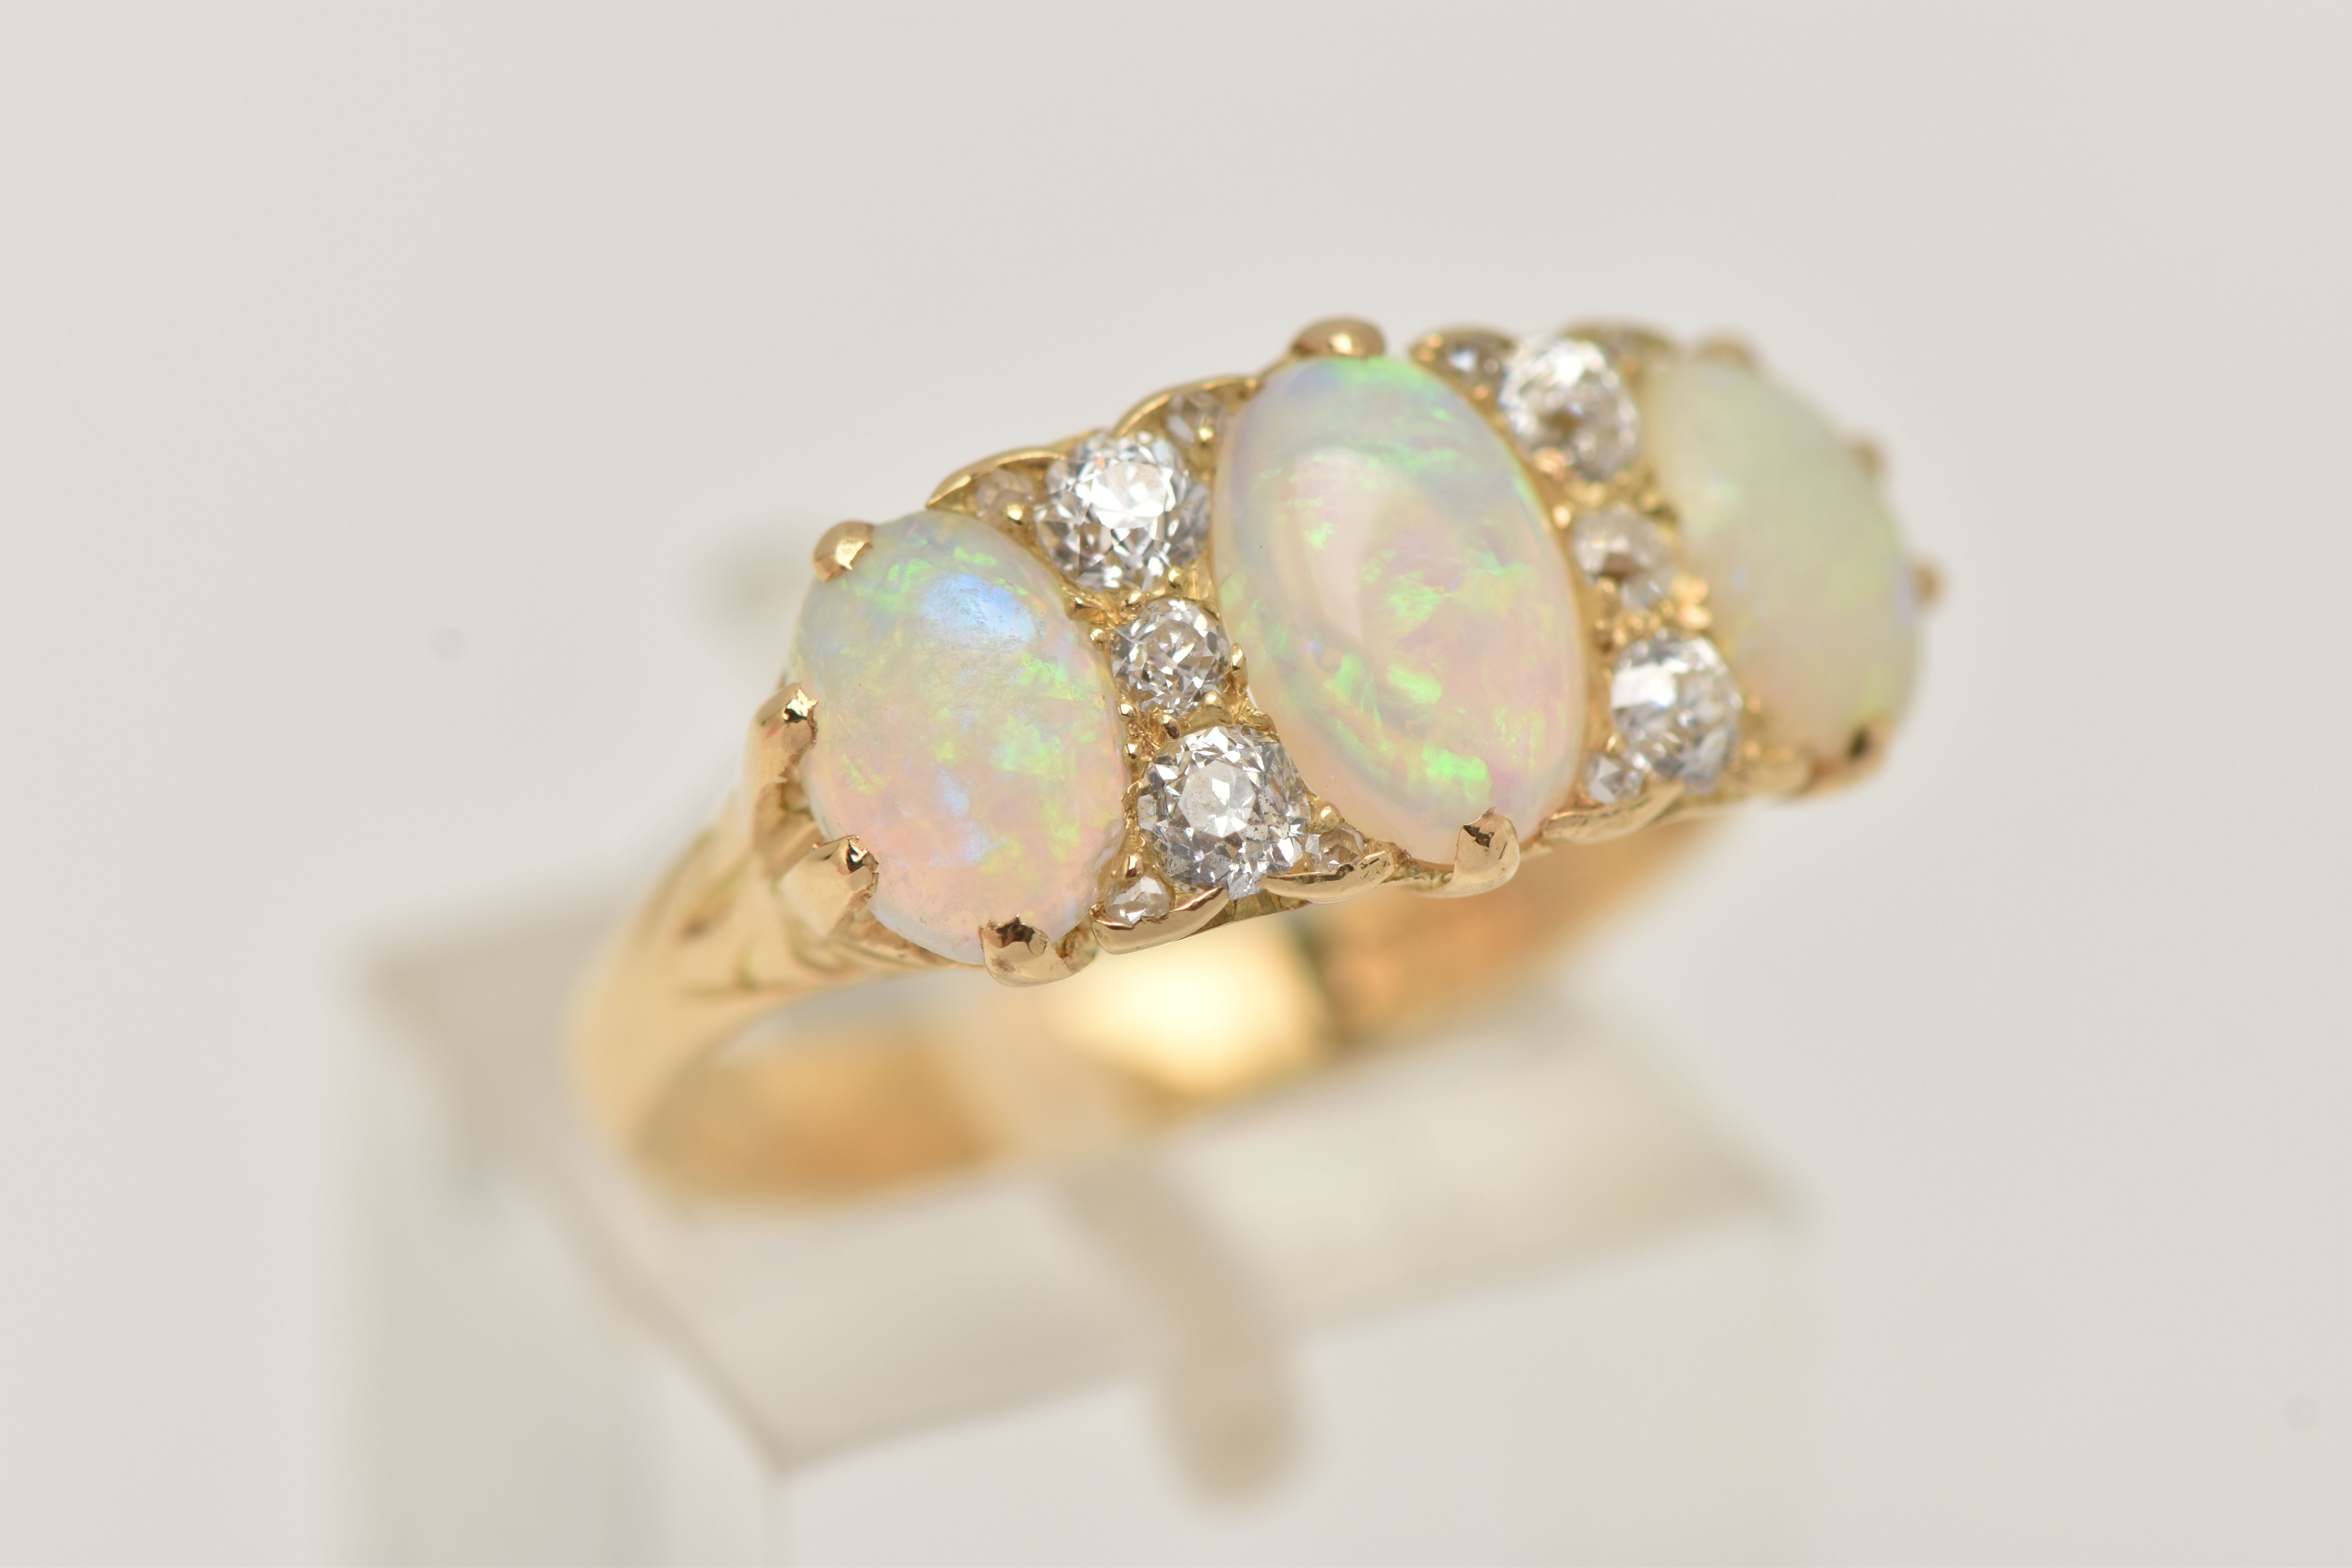 AN EARLY 20TH CENTURY OPAL AND DIAMOND RING, set with graduating oval opal cabochons, measuring from - Image 4 of 4